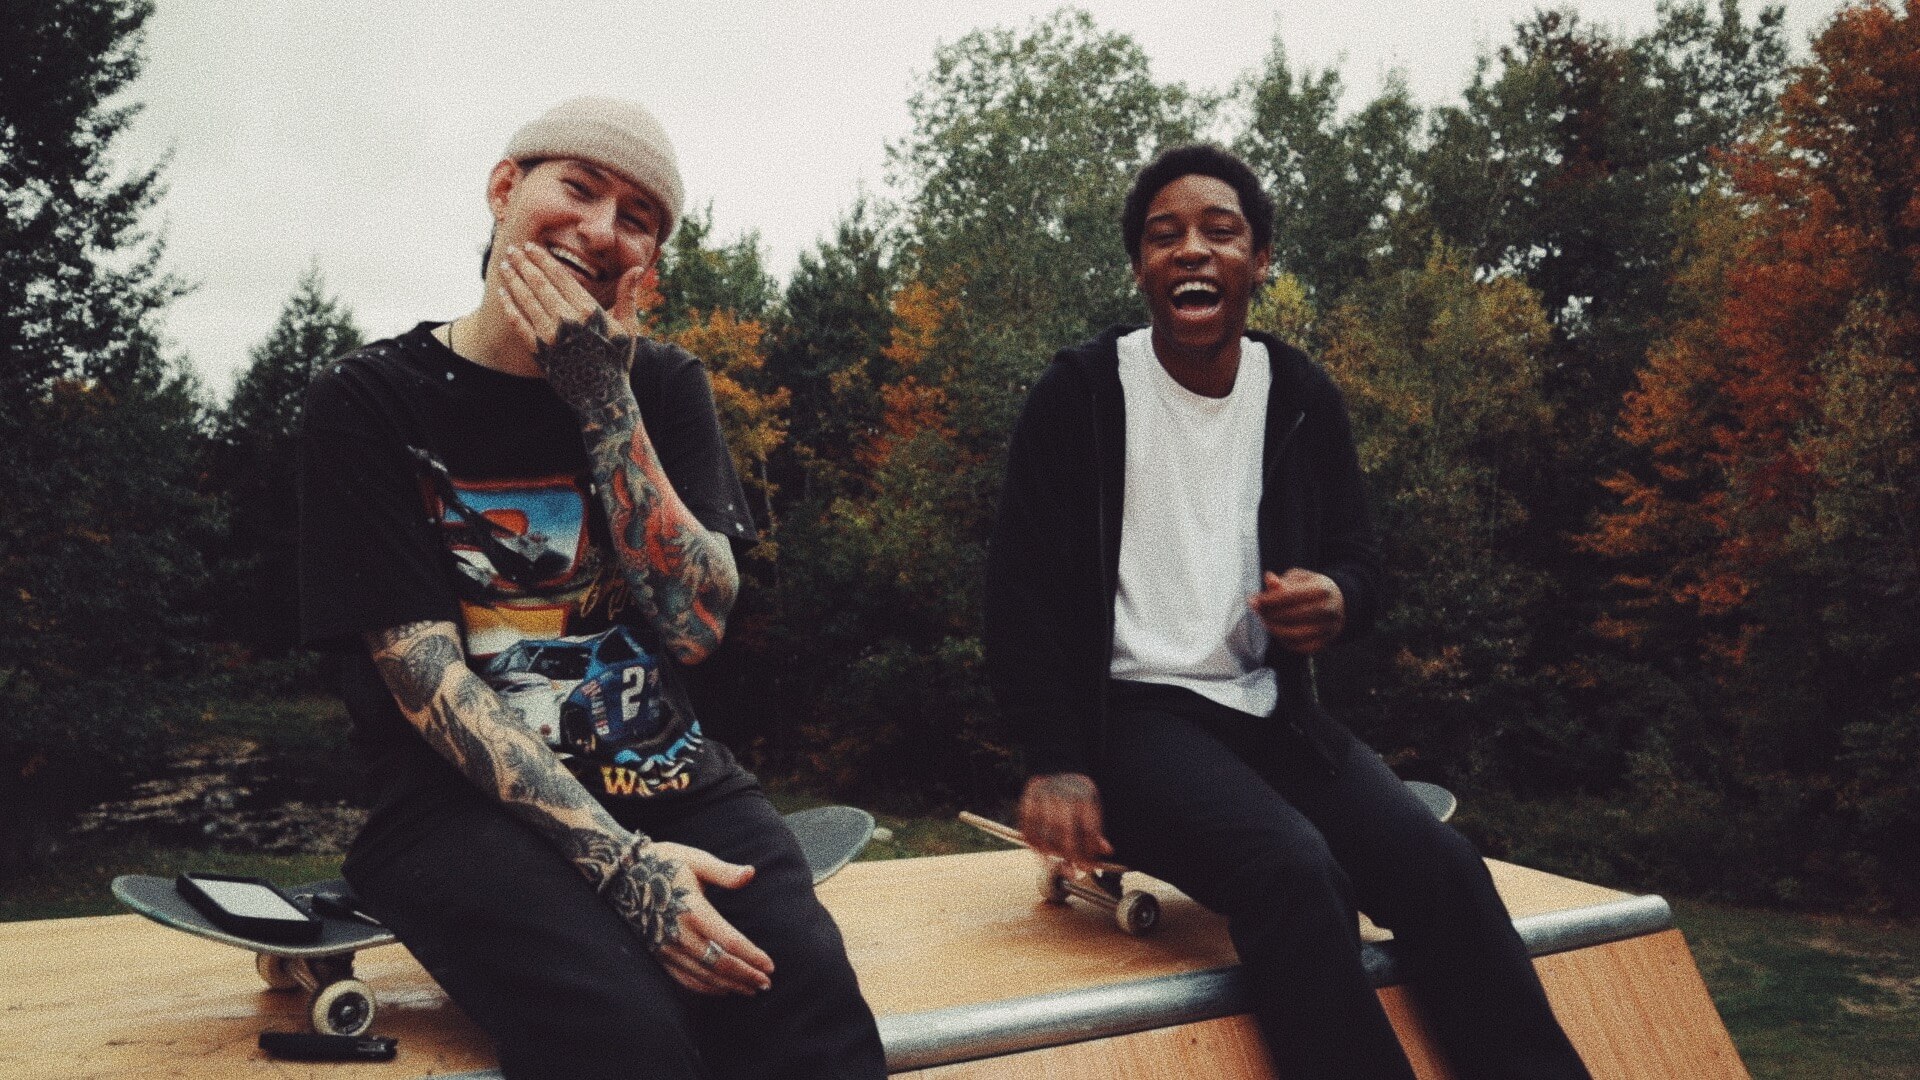 NOTHING,NOWHERE RELEASES NEW SINGLE “BLOOD” FEATURING KENNYHOOPLA & JUDGE